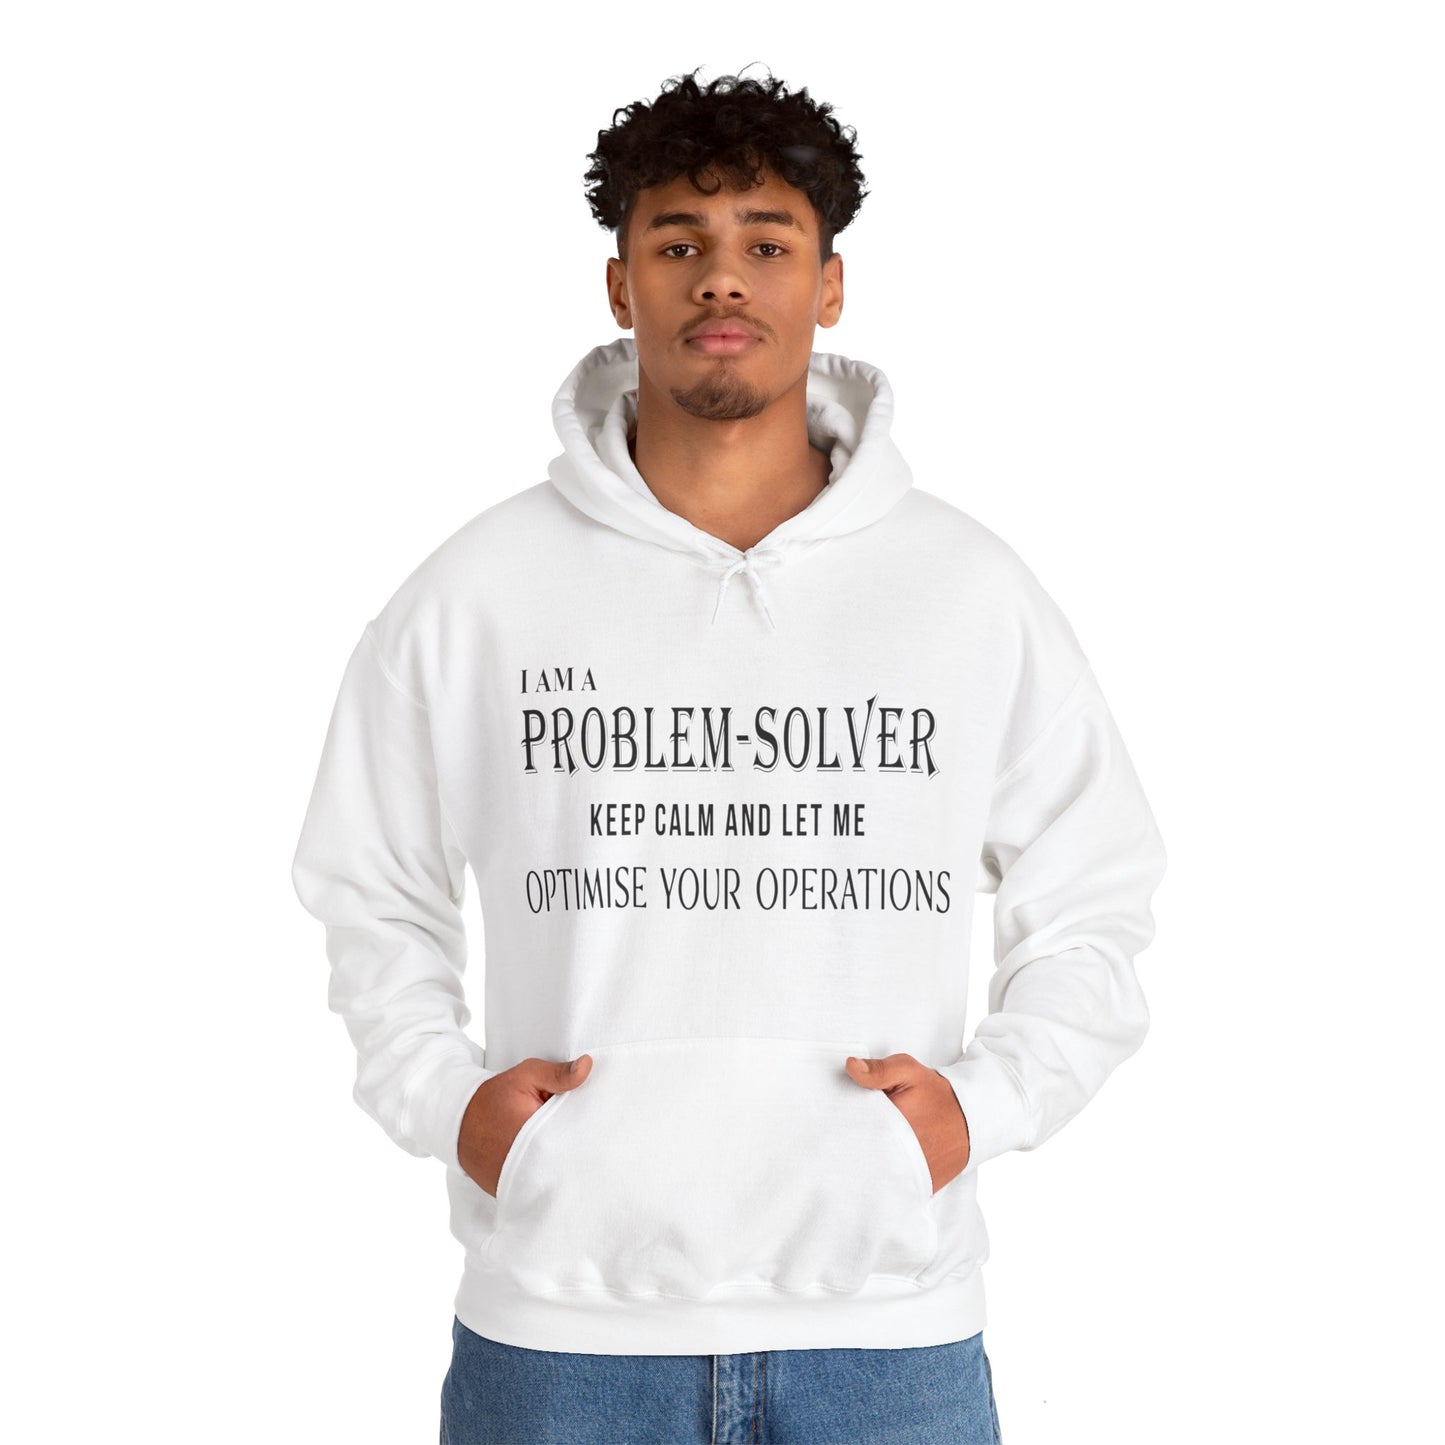 Dr. Flowers' Elevate Your Impact Inspirational Quote Unisex Hoodie